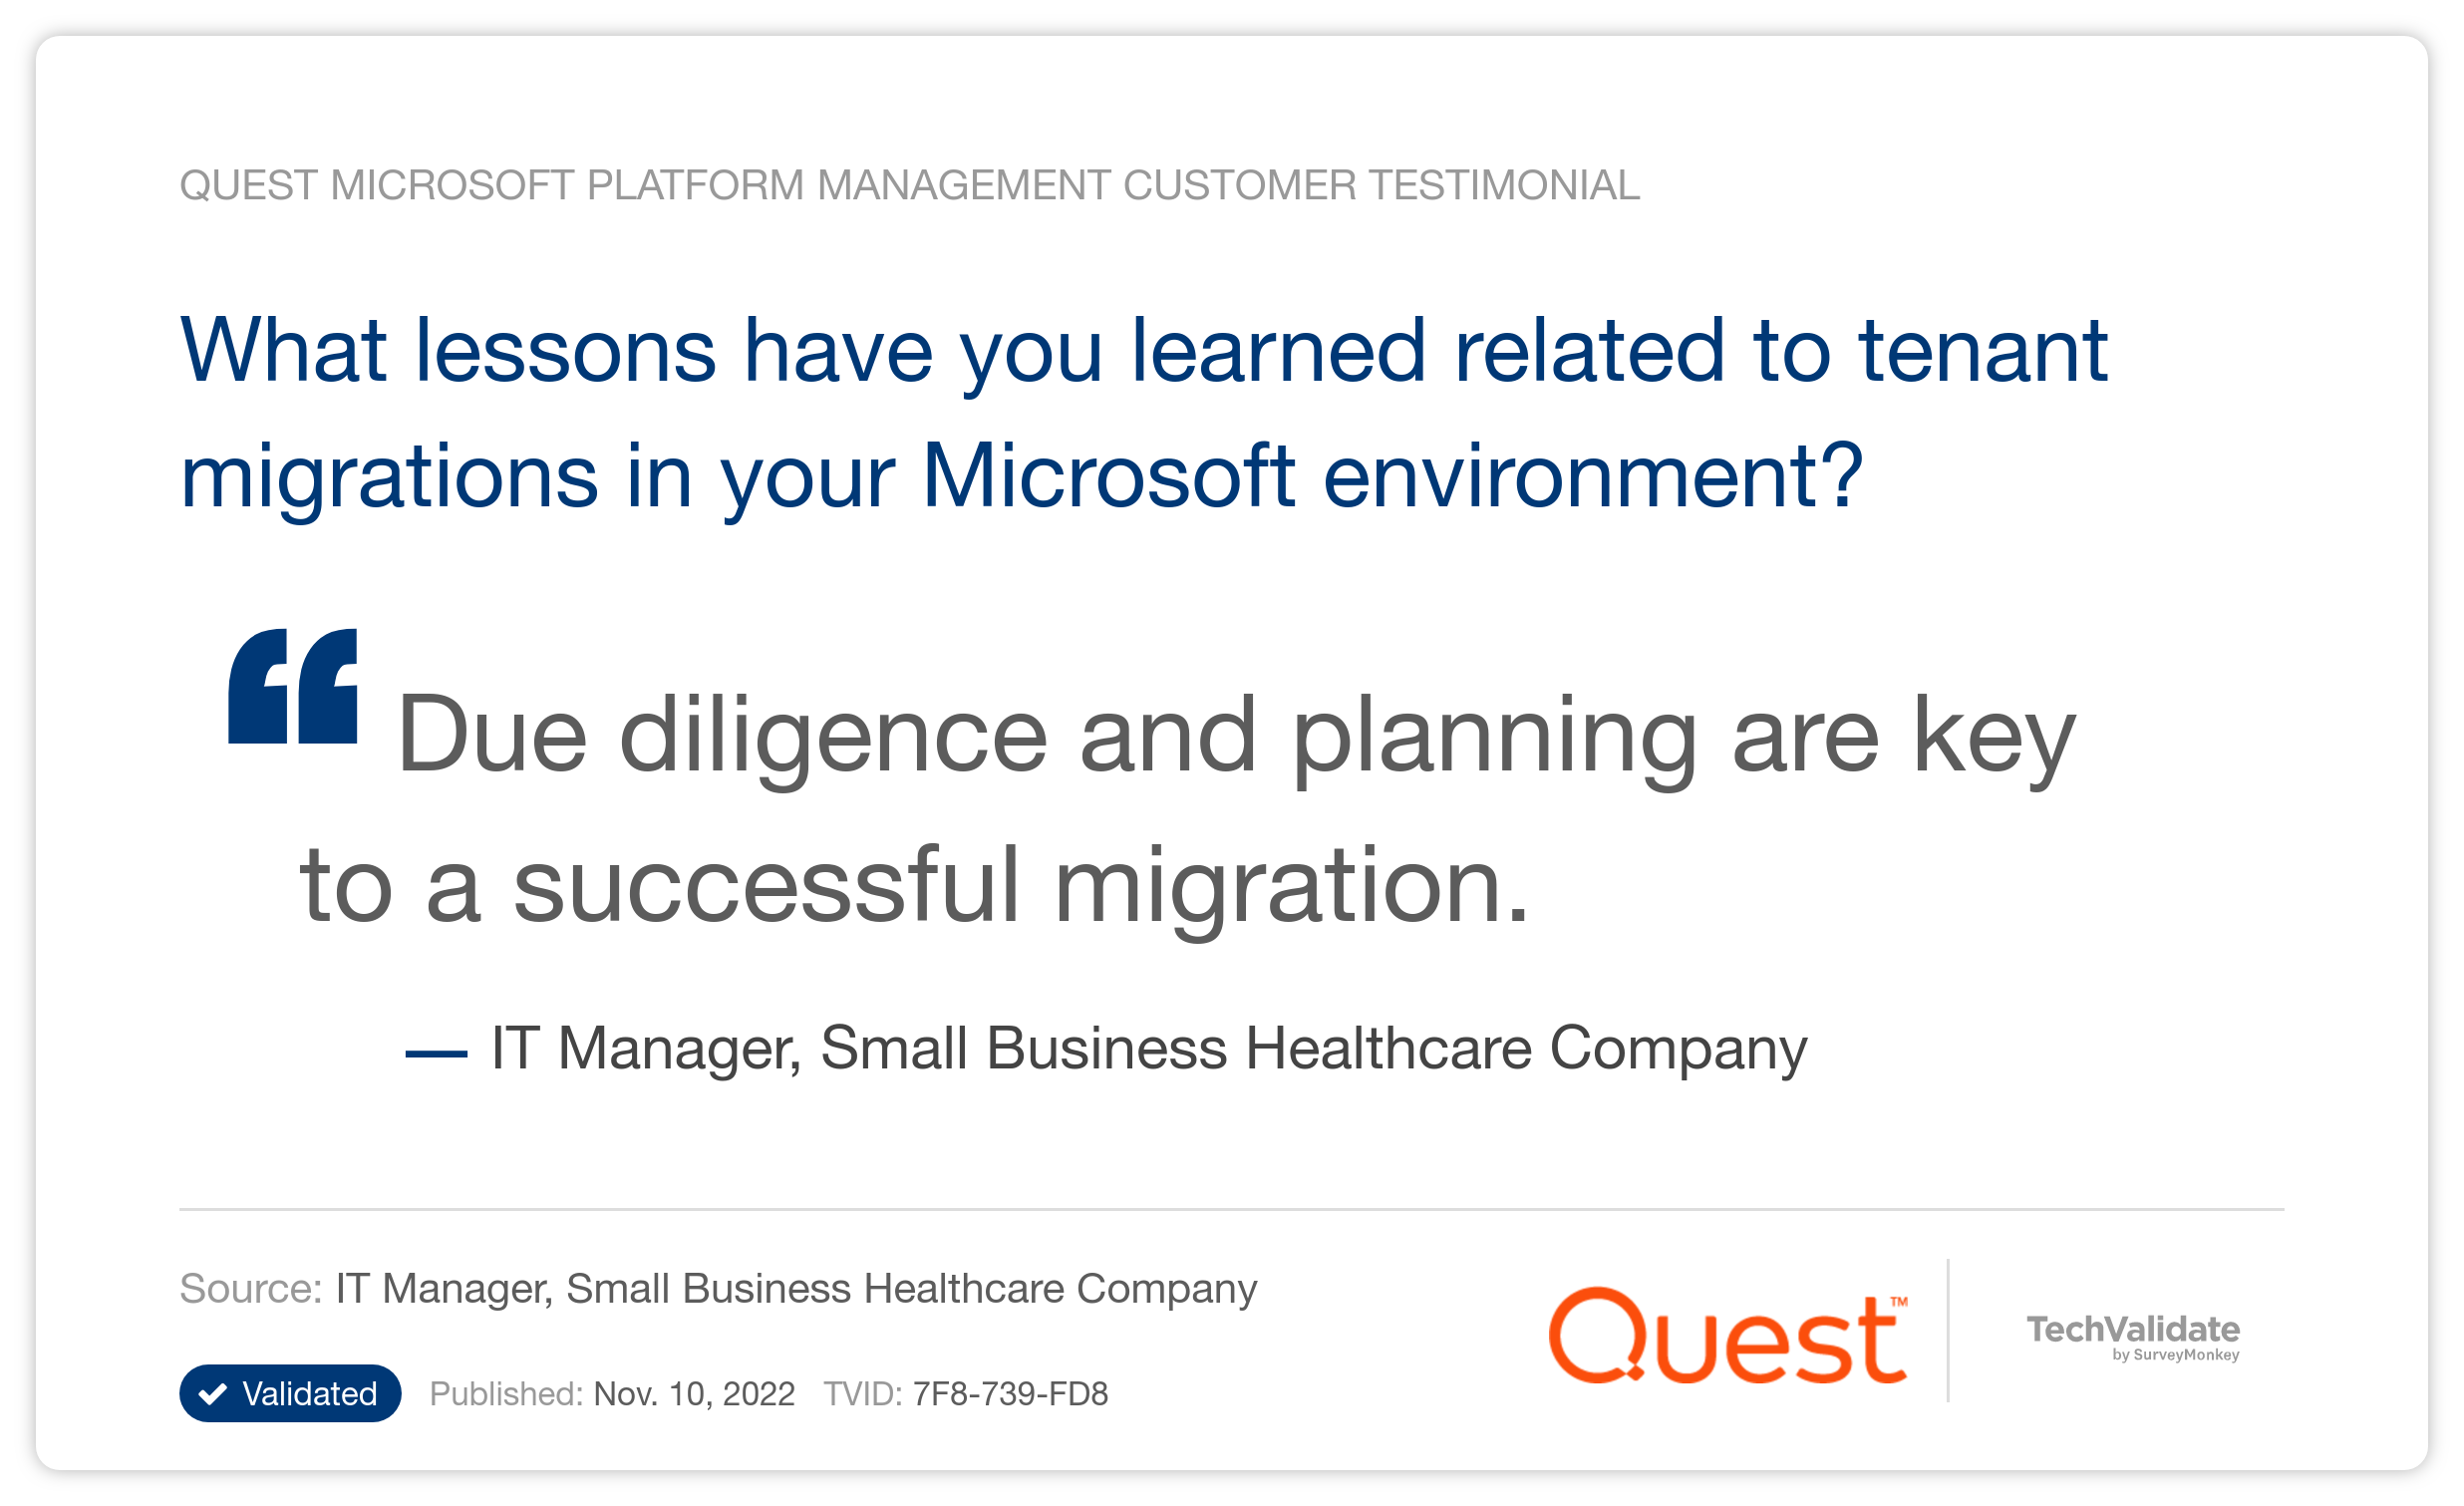 What lessons have you learned related to tenant migrations in your Microsoft environment?